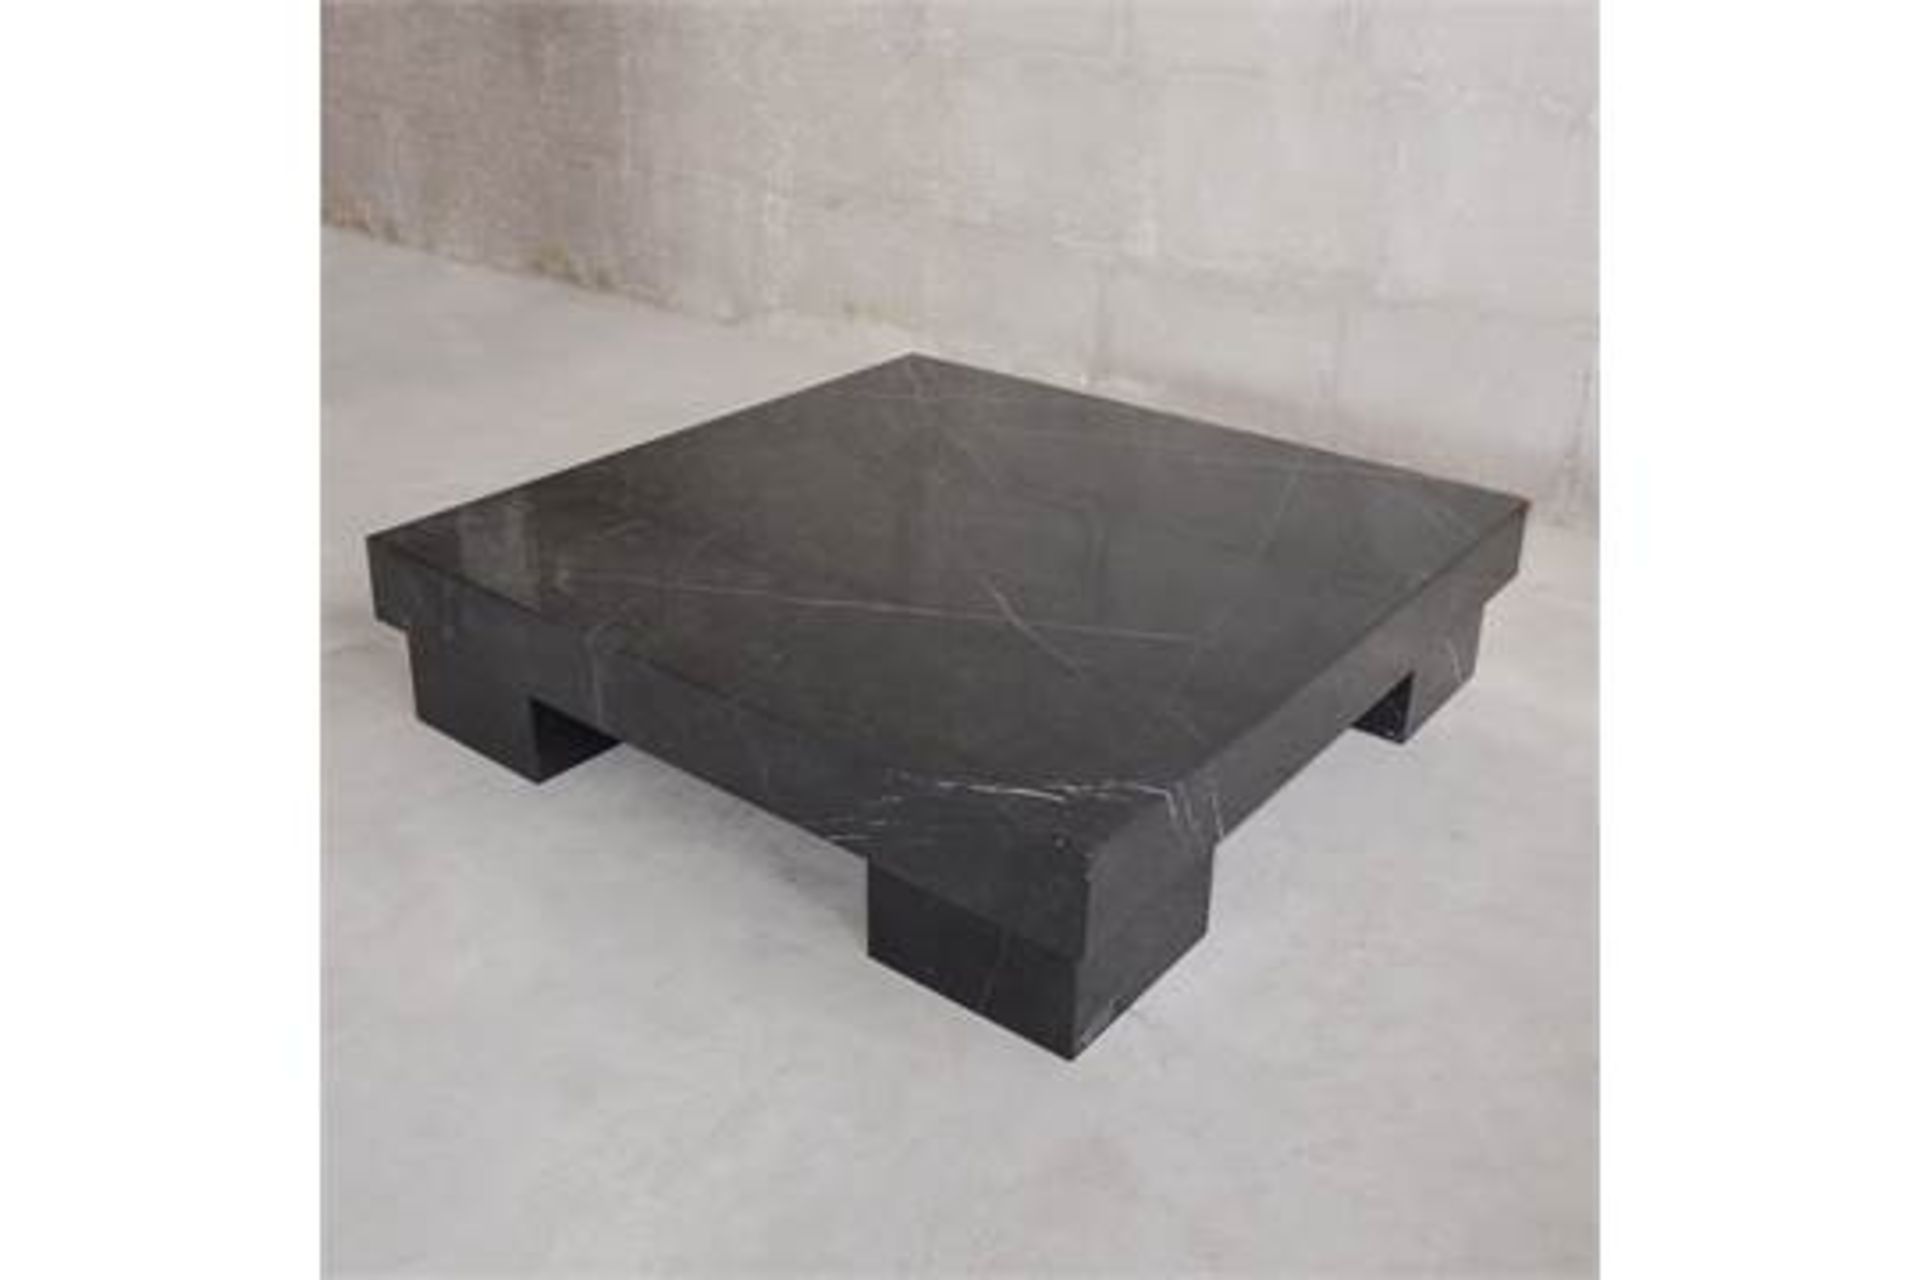 Marble Coffee Table Marble Coffee Table Emperor Augustus, founder of the Roman Empire, boasted that